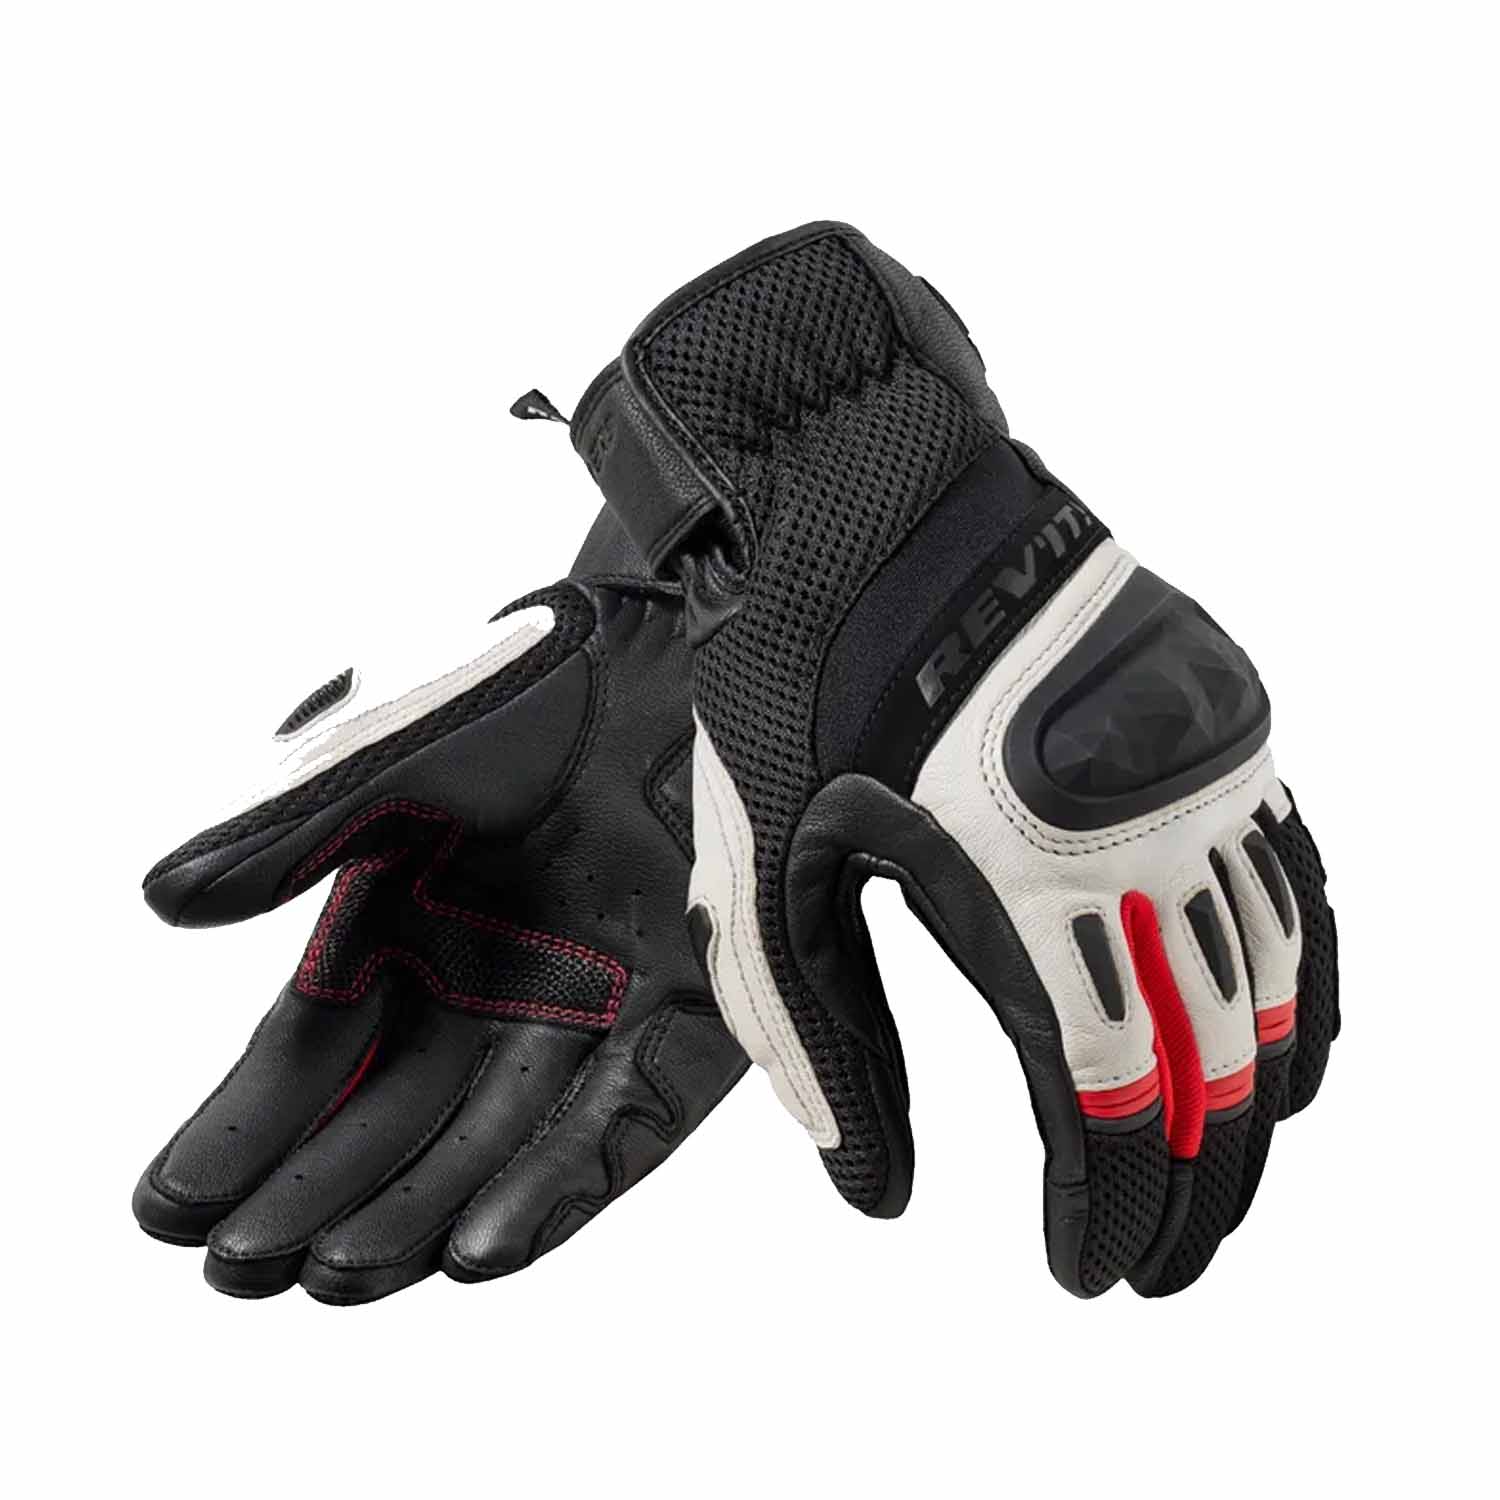 Image of REV'IT! Dirt 4 Gloves Black Red Taille 2XL